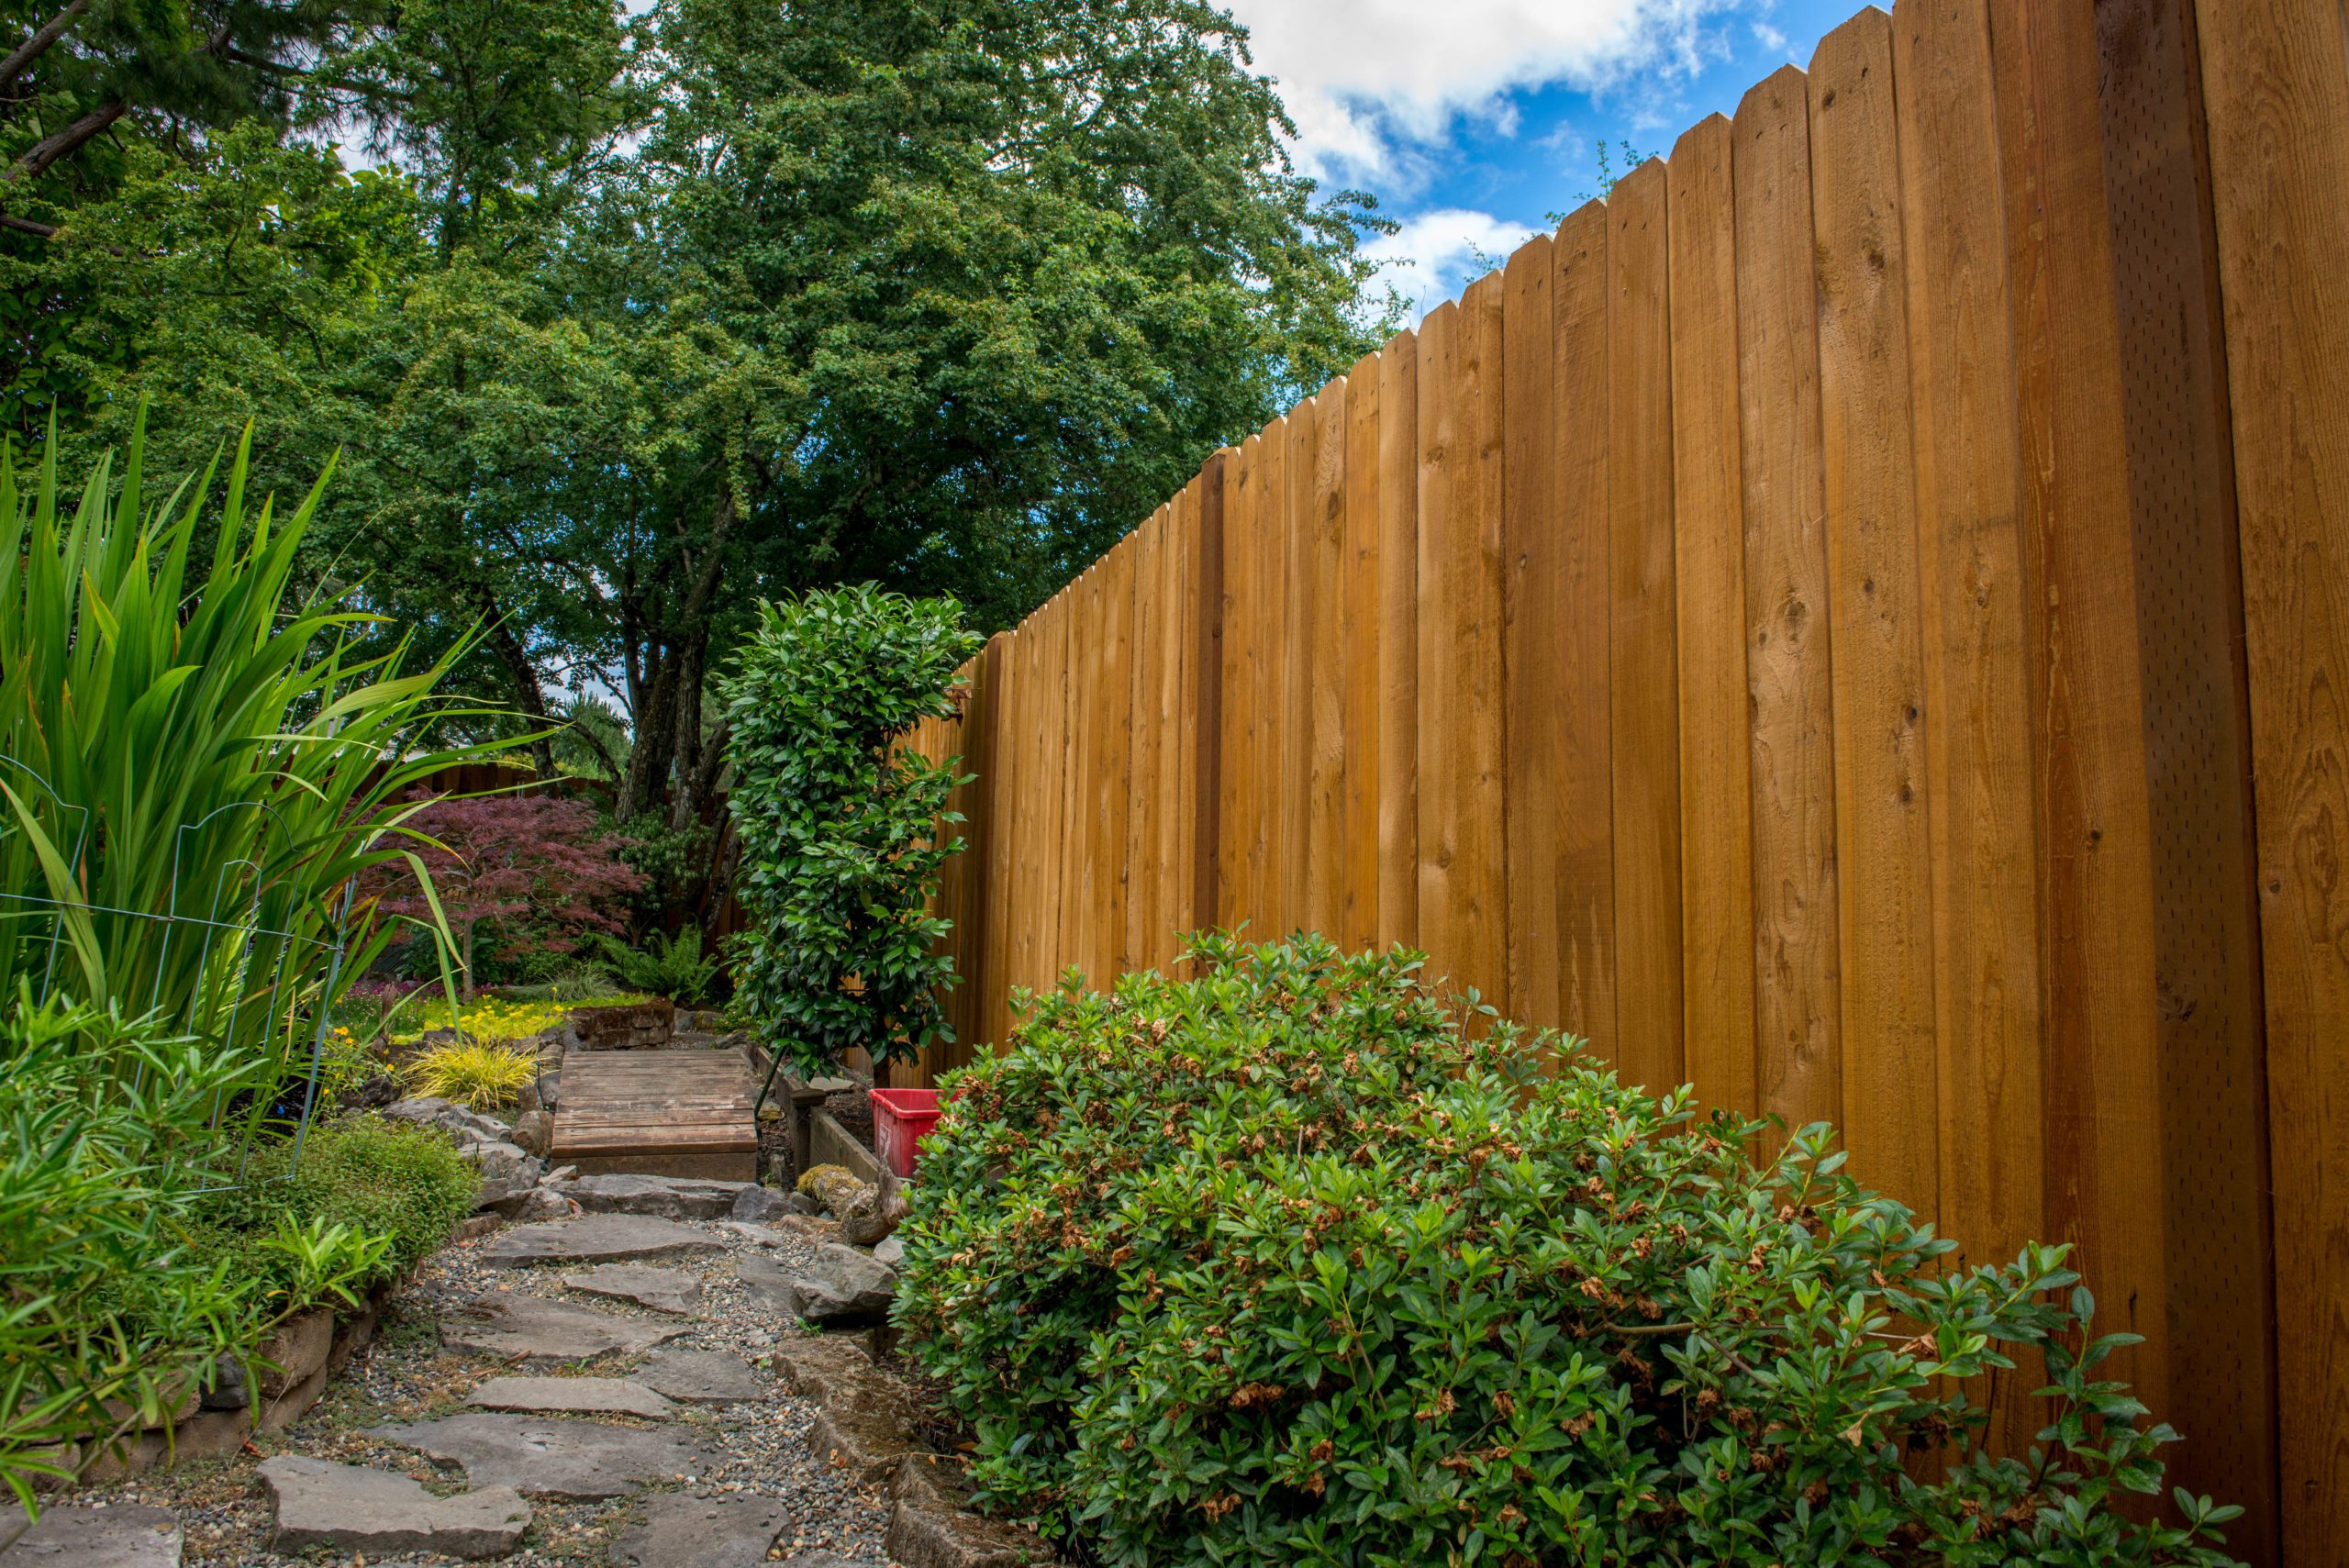 How to repair a wooden fence - Maun Industries Limited